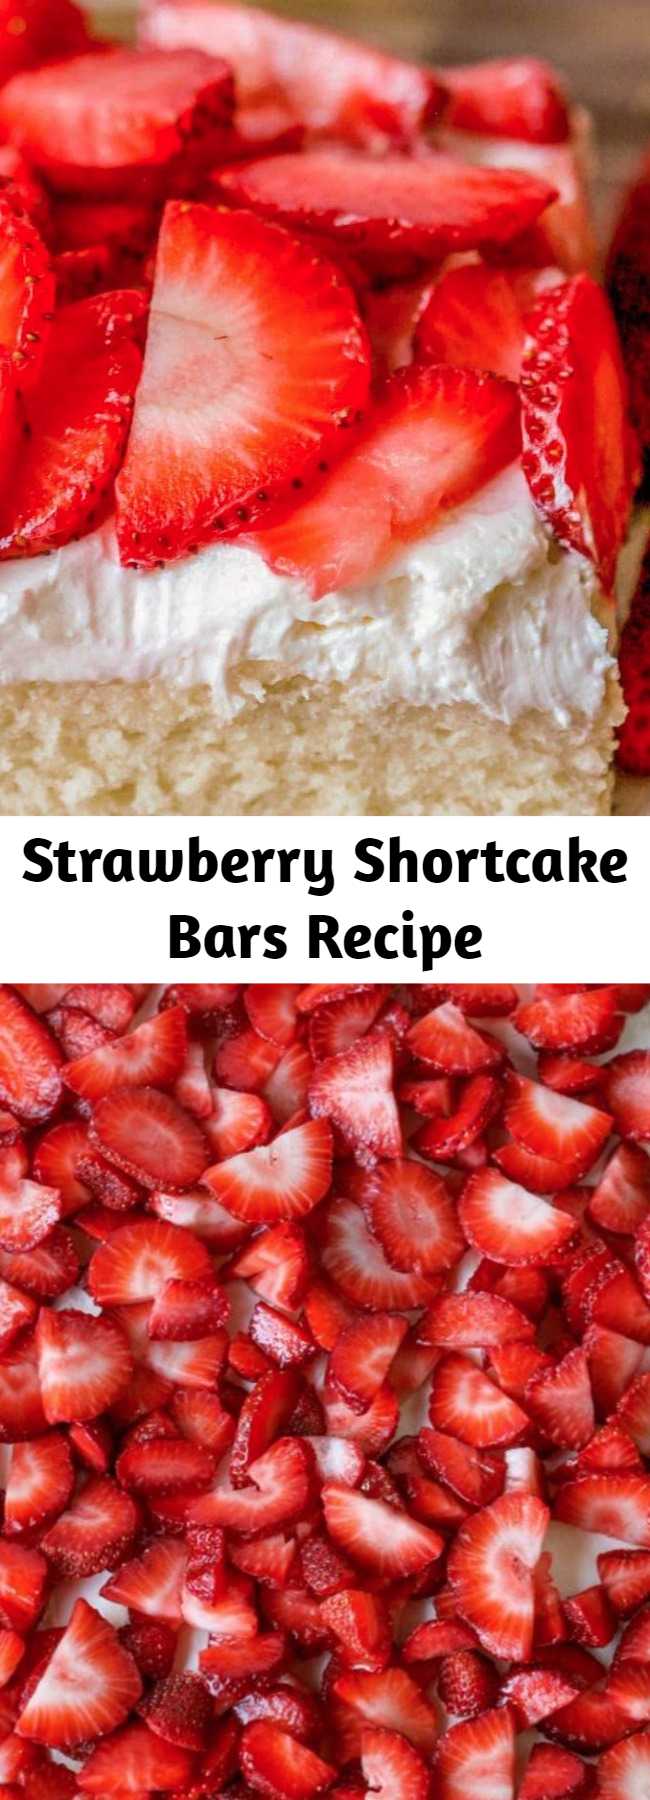 Strawberry Shortcake Bars Recipe - A soft vanilla cake-like crust perfectly combines with a light layer of whipped cream cheese frosting. Top it off with fresh strawberries for delicious strawberry shortcake bars!